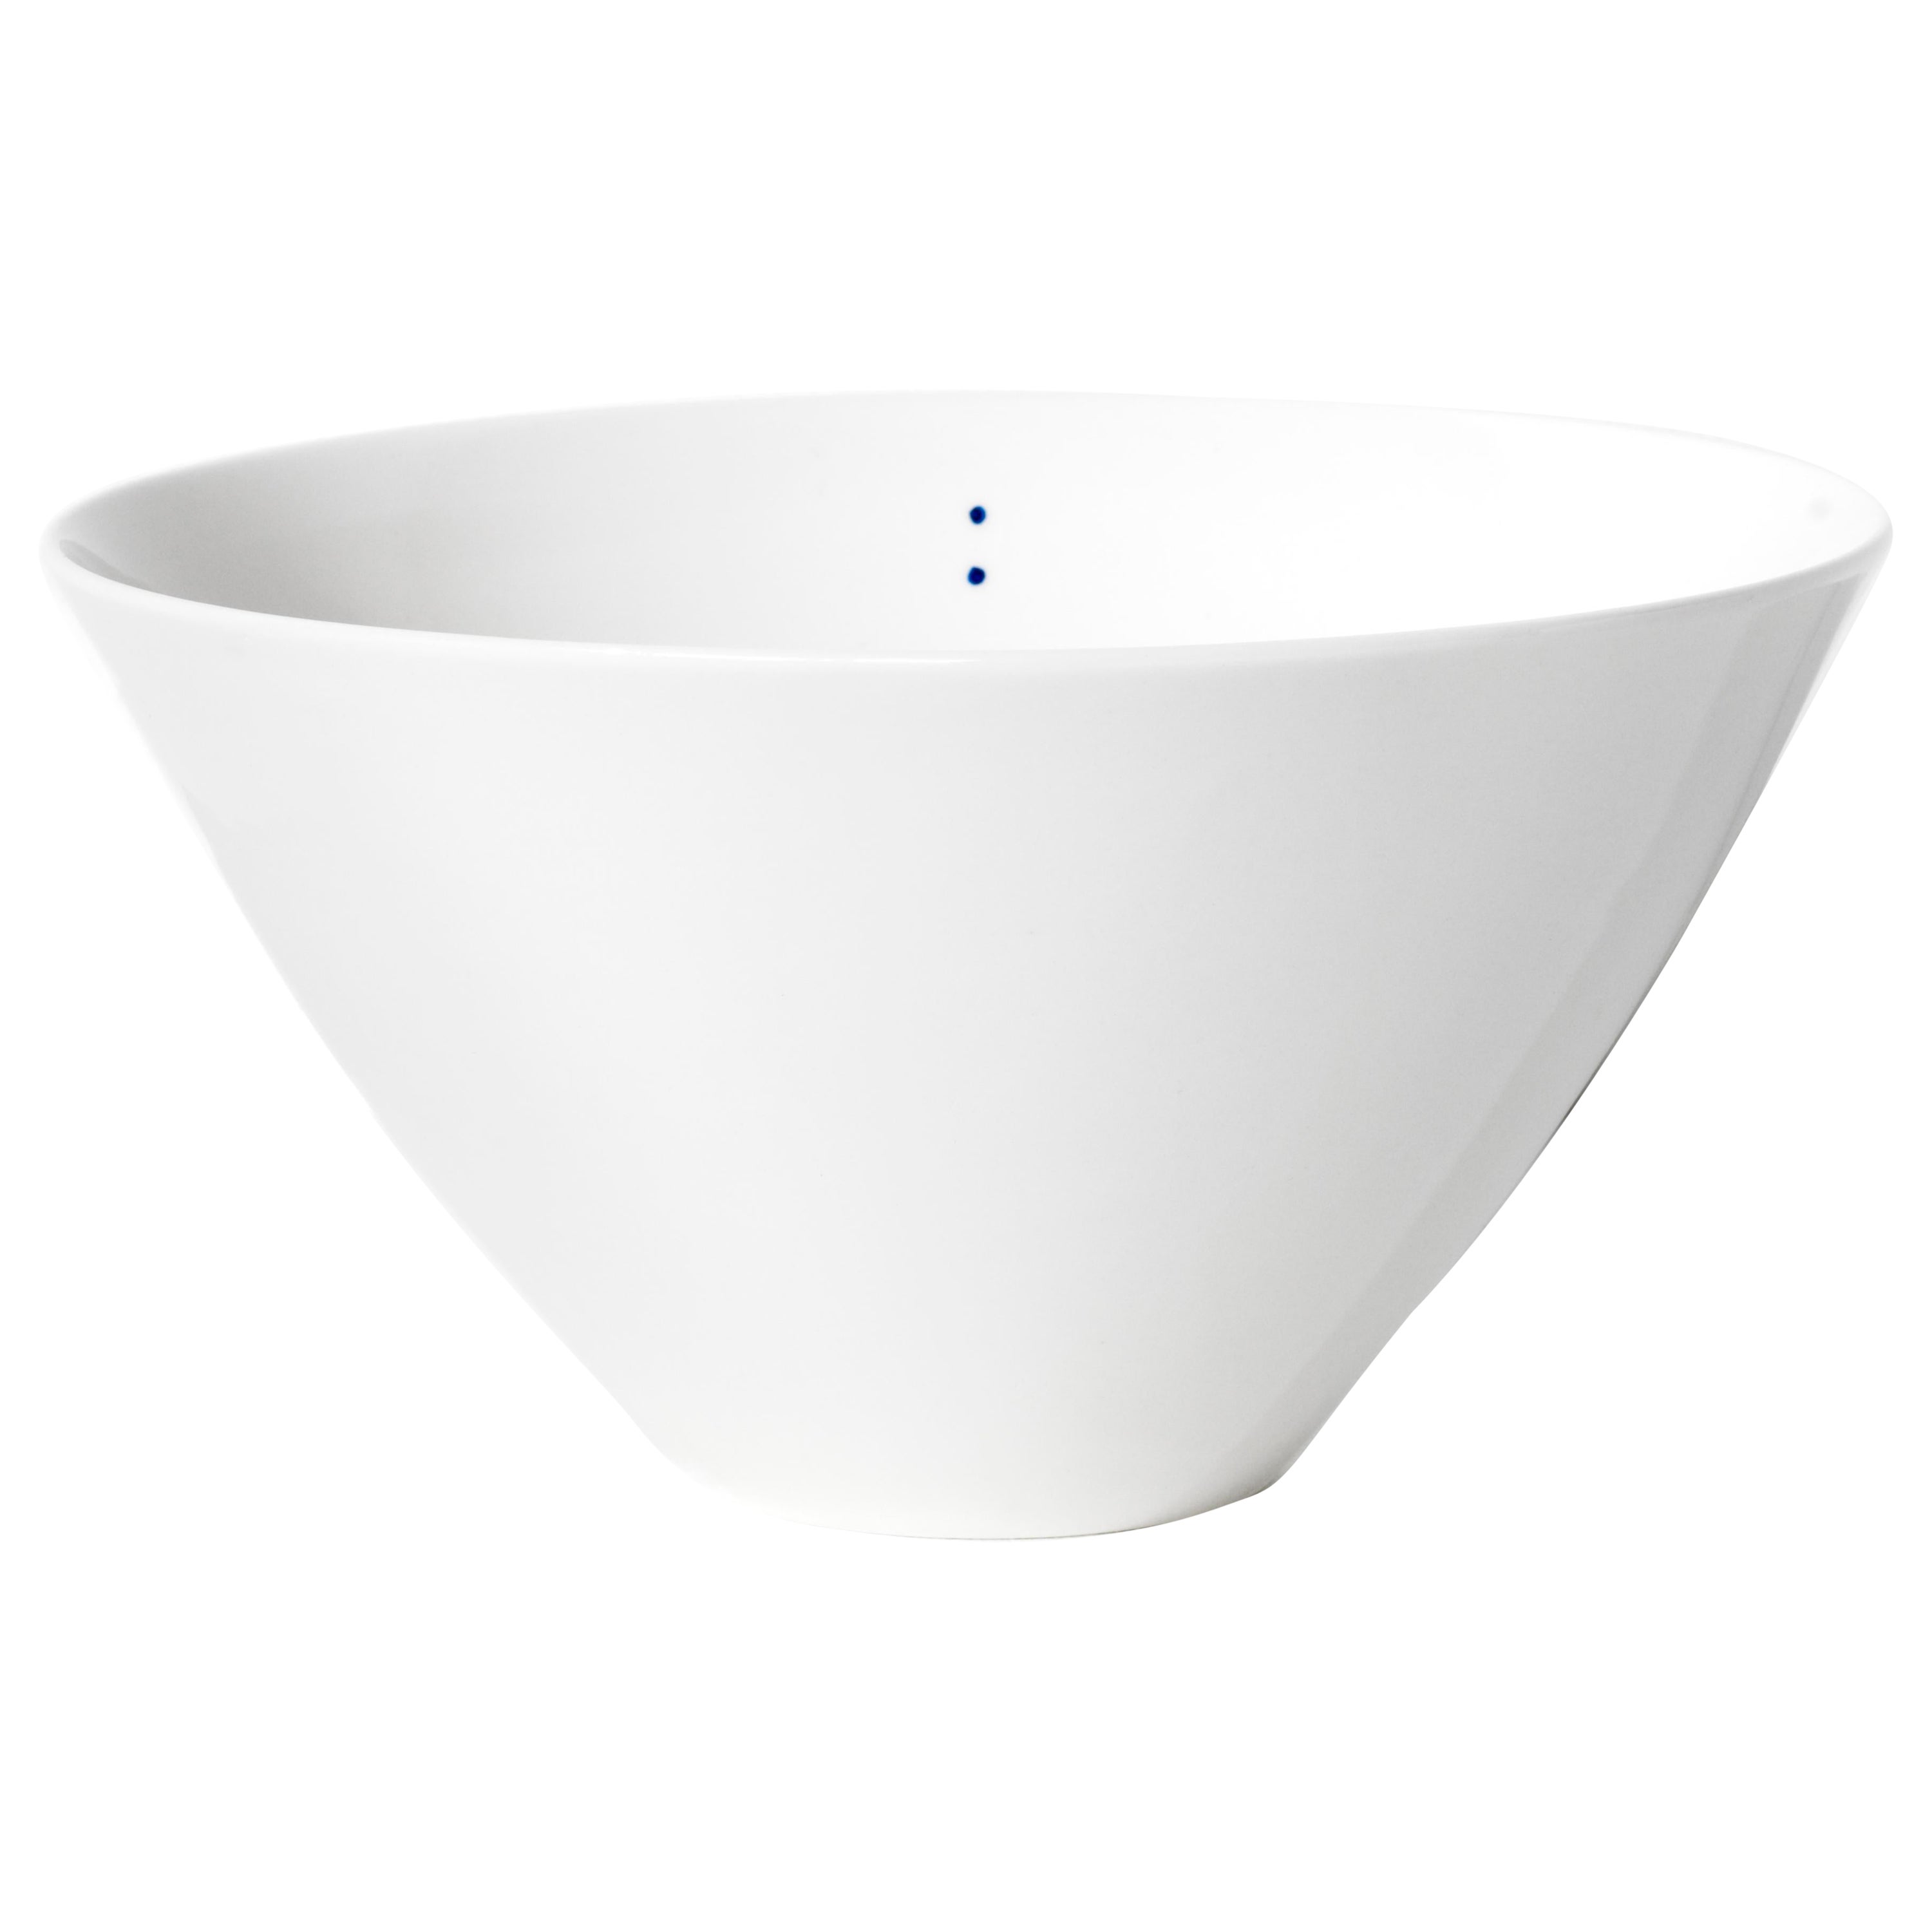 Shiro bowl large 2 dots For Sale